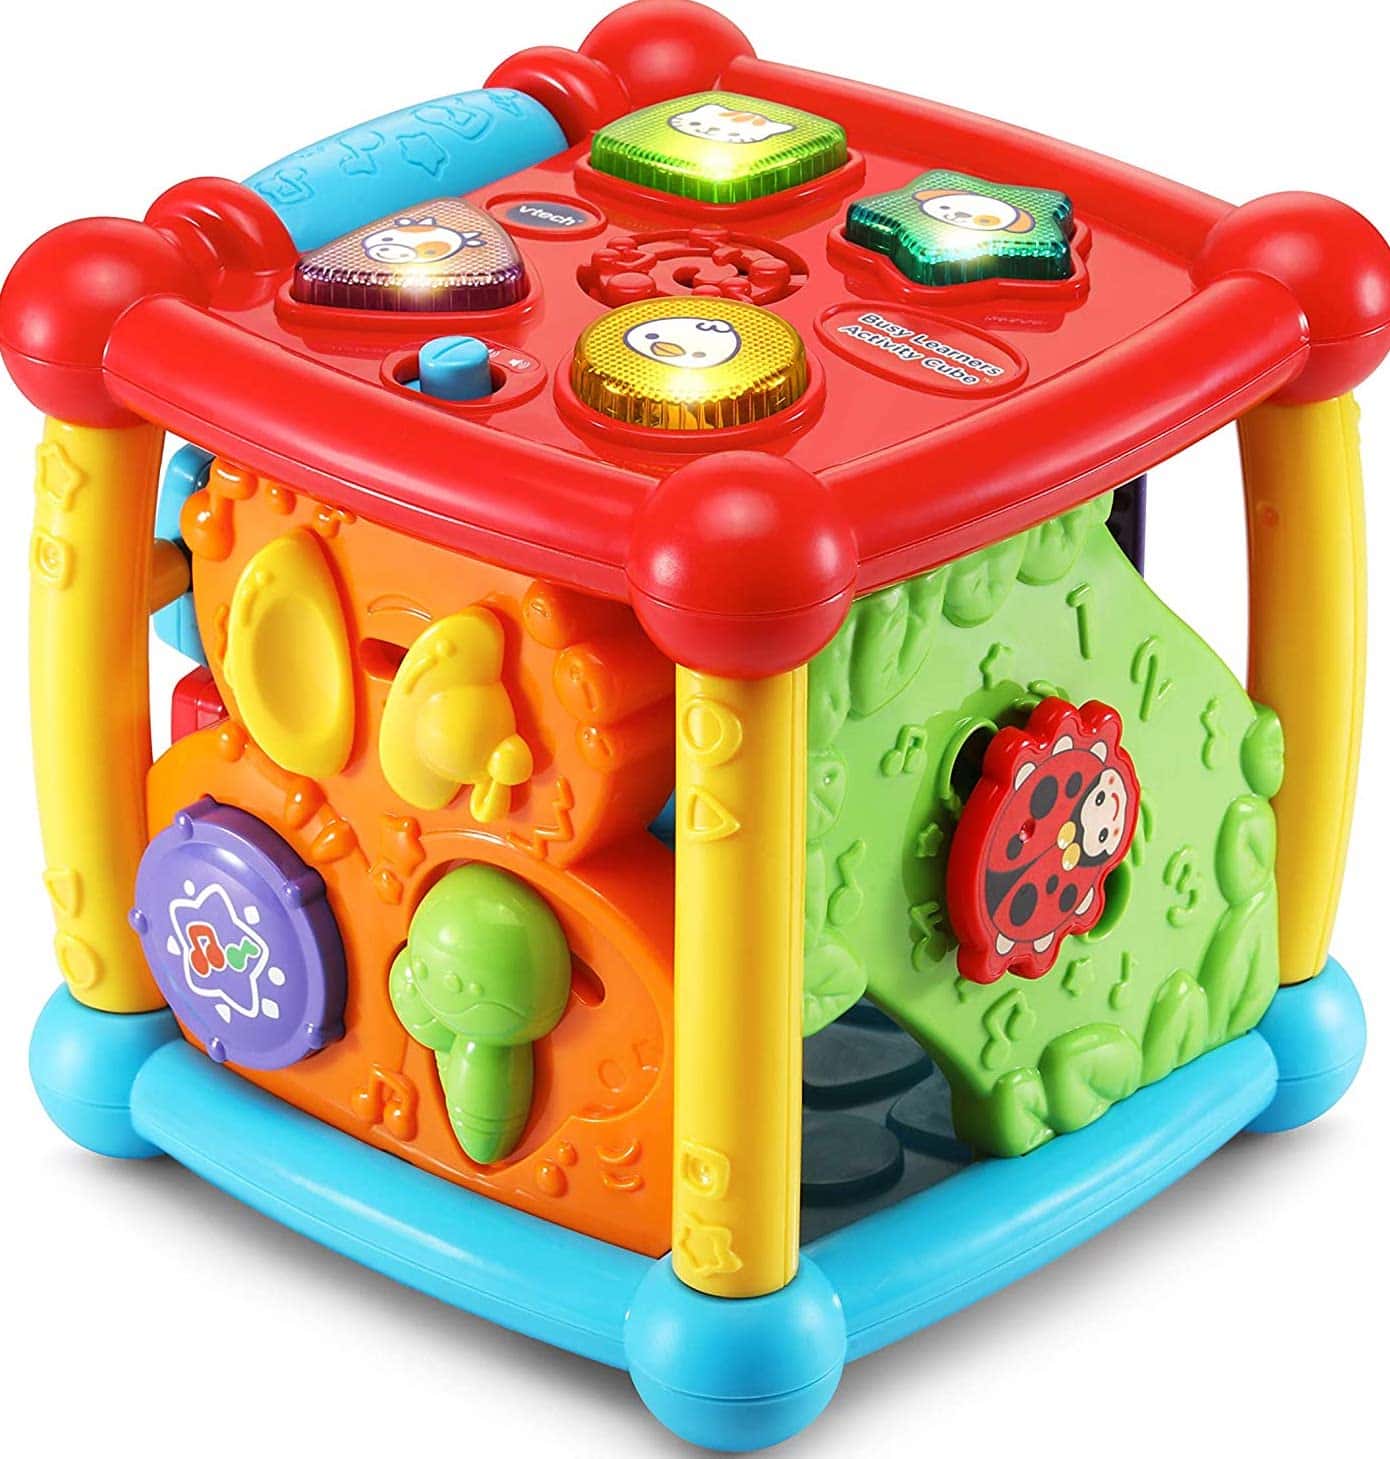 Colorful activity cube for babies